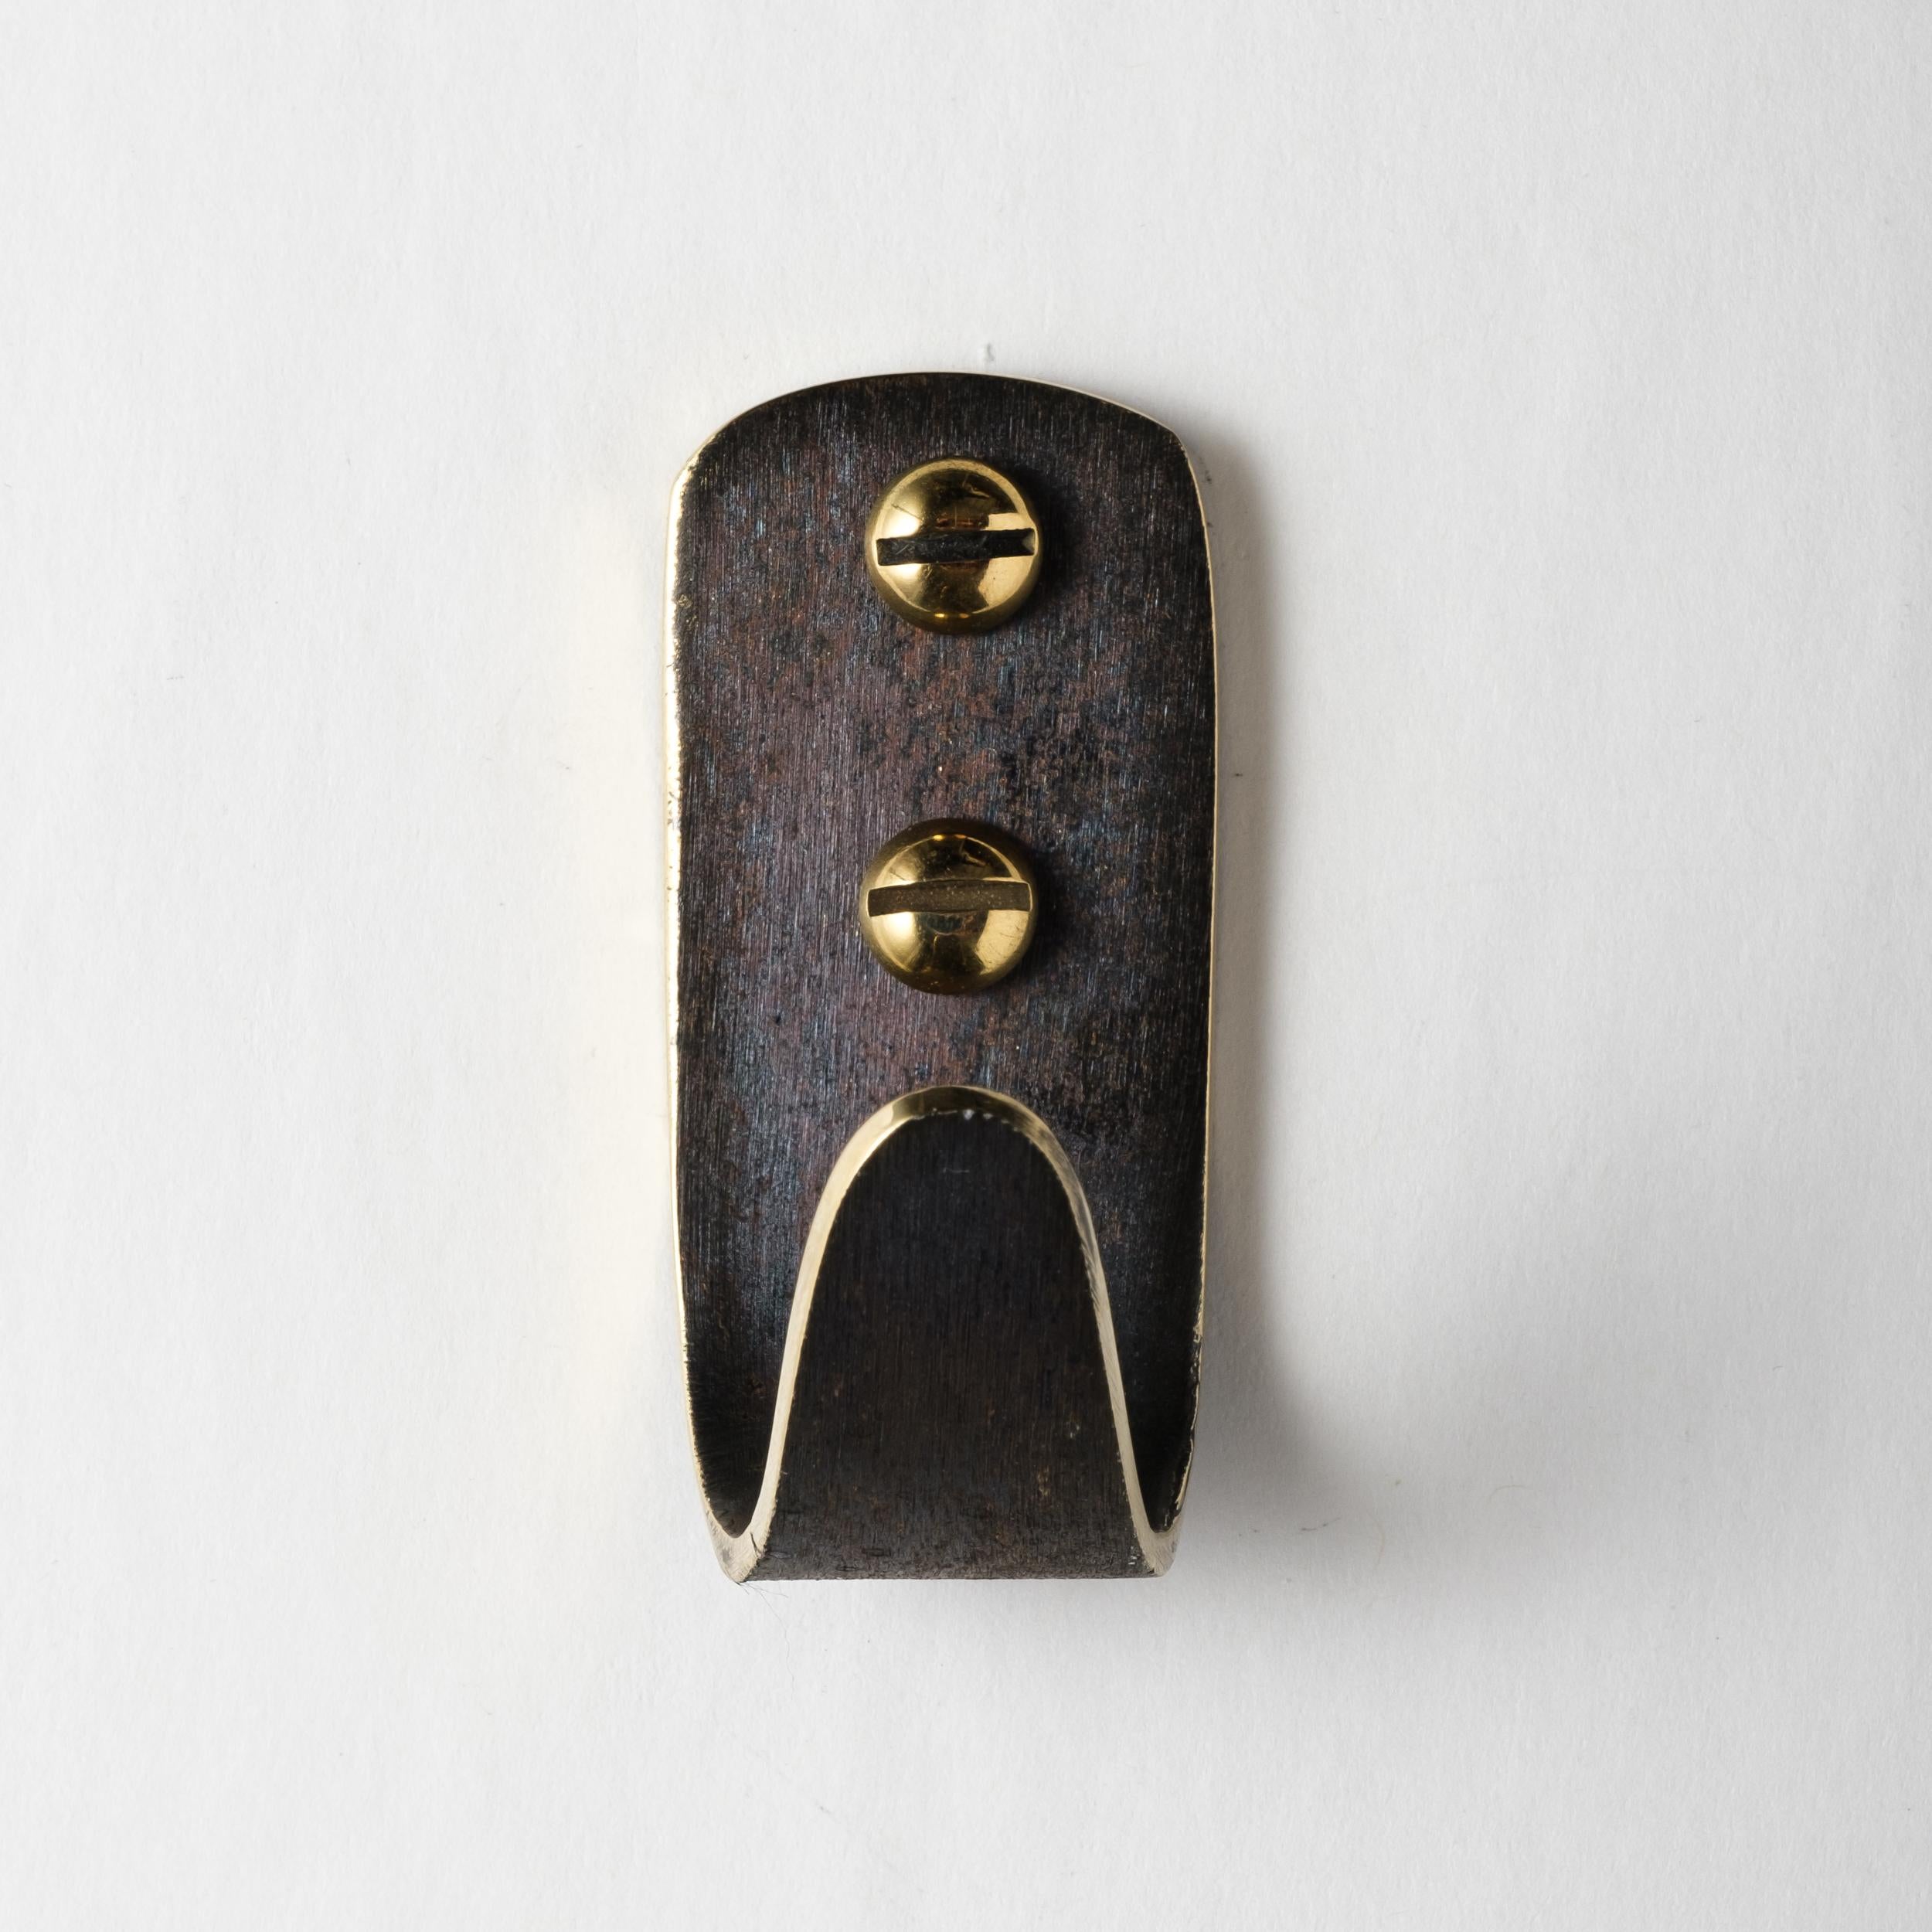 Carl Auböck model #4330/1 patinated brass hook. Designed in the 1950s, this versatile and Minimalist Viennese hook is executed in patinated and polished brass by Werkstätte Carl Auböck, Austria. 

Produced by Carl Auböck IV in the original Auböck